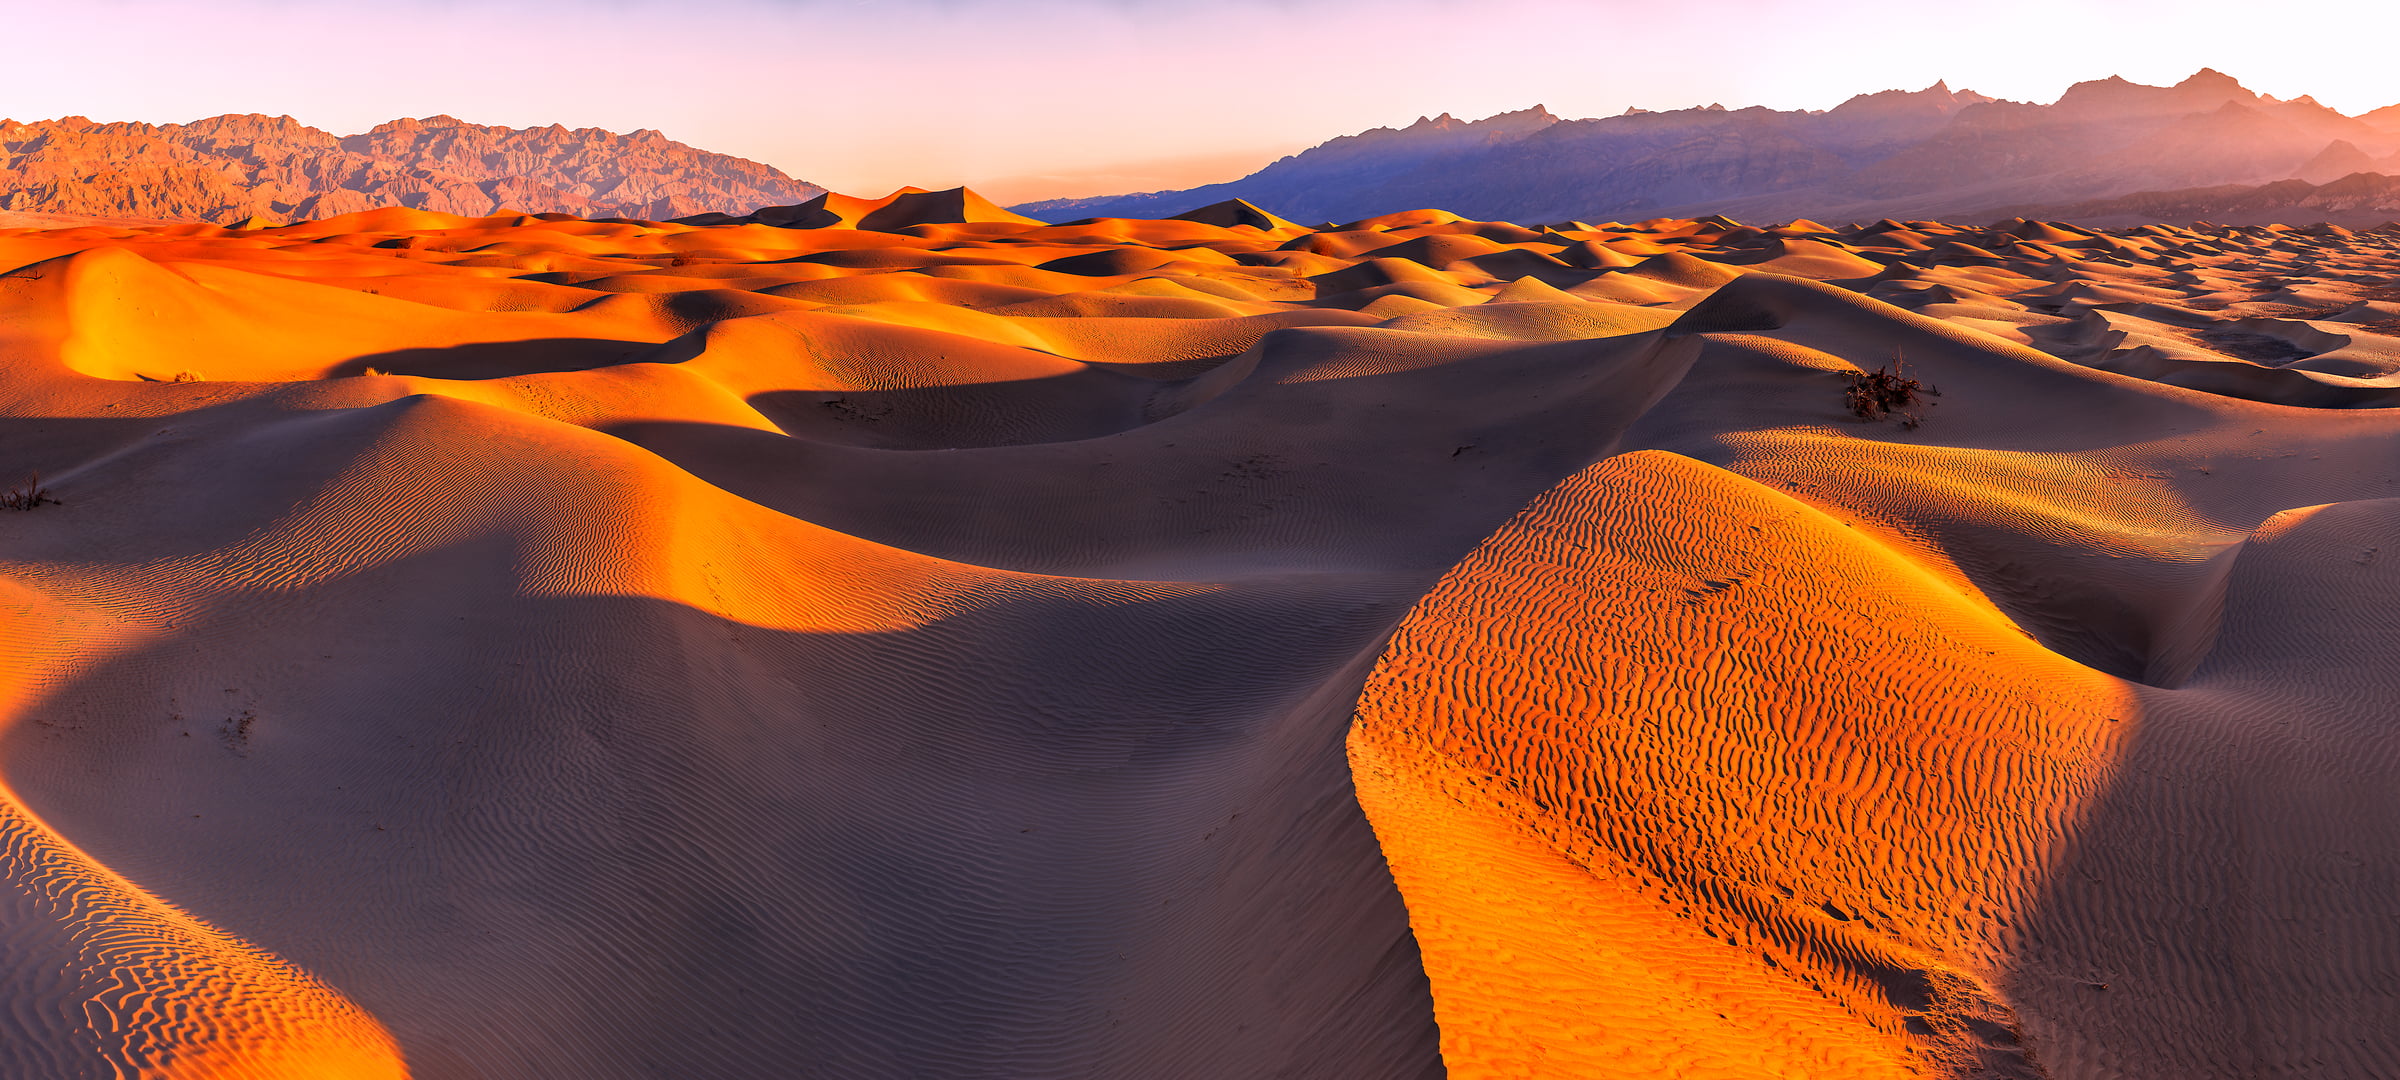 1,831 megapixels! A very high resolution, large-format VAST photo print of sand dunes in Death Valley National Park; fine art landscape photo created by Chris Collacott in Death Valley National Park, California.